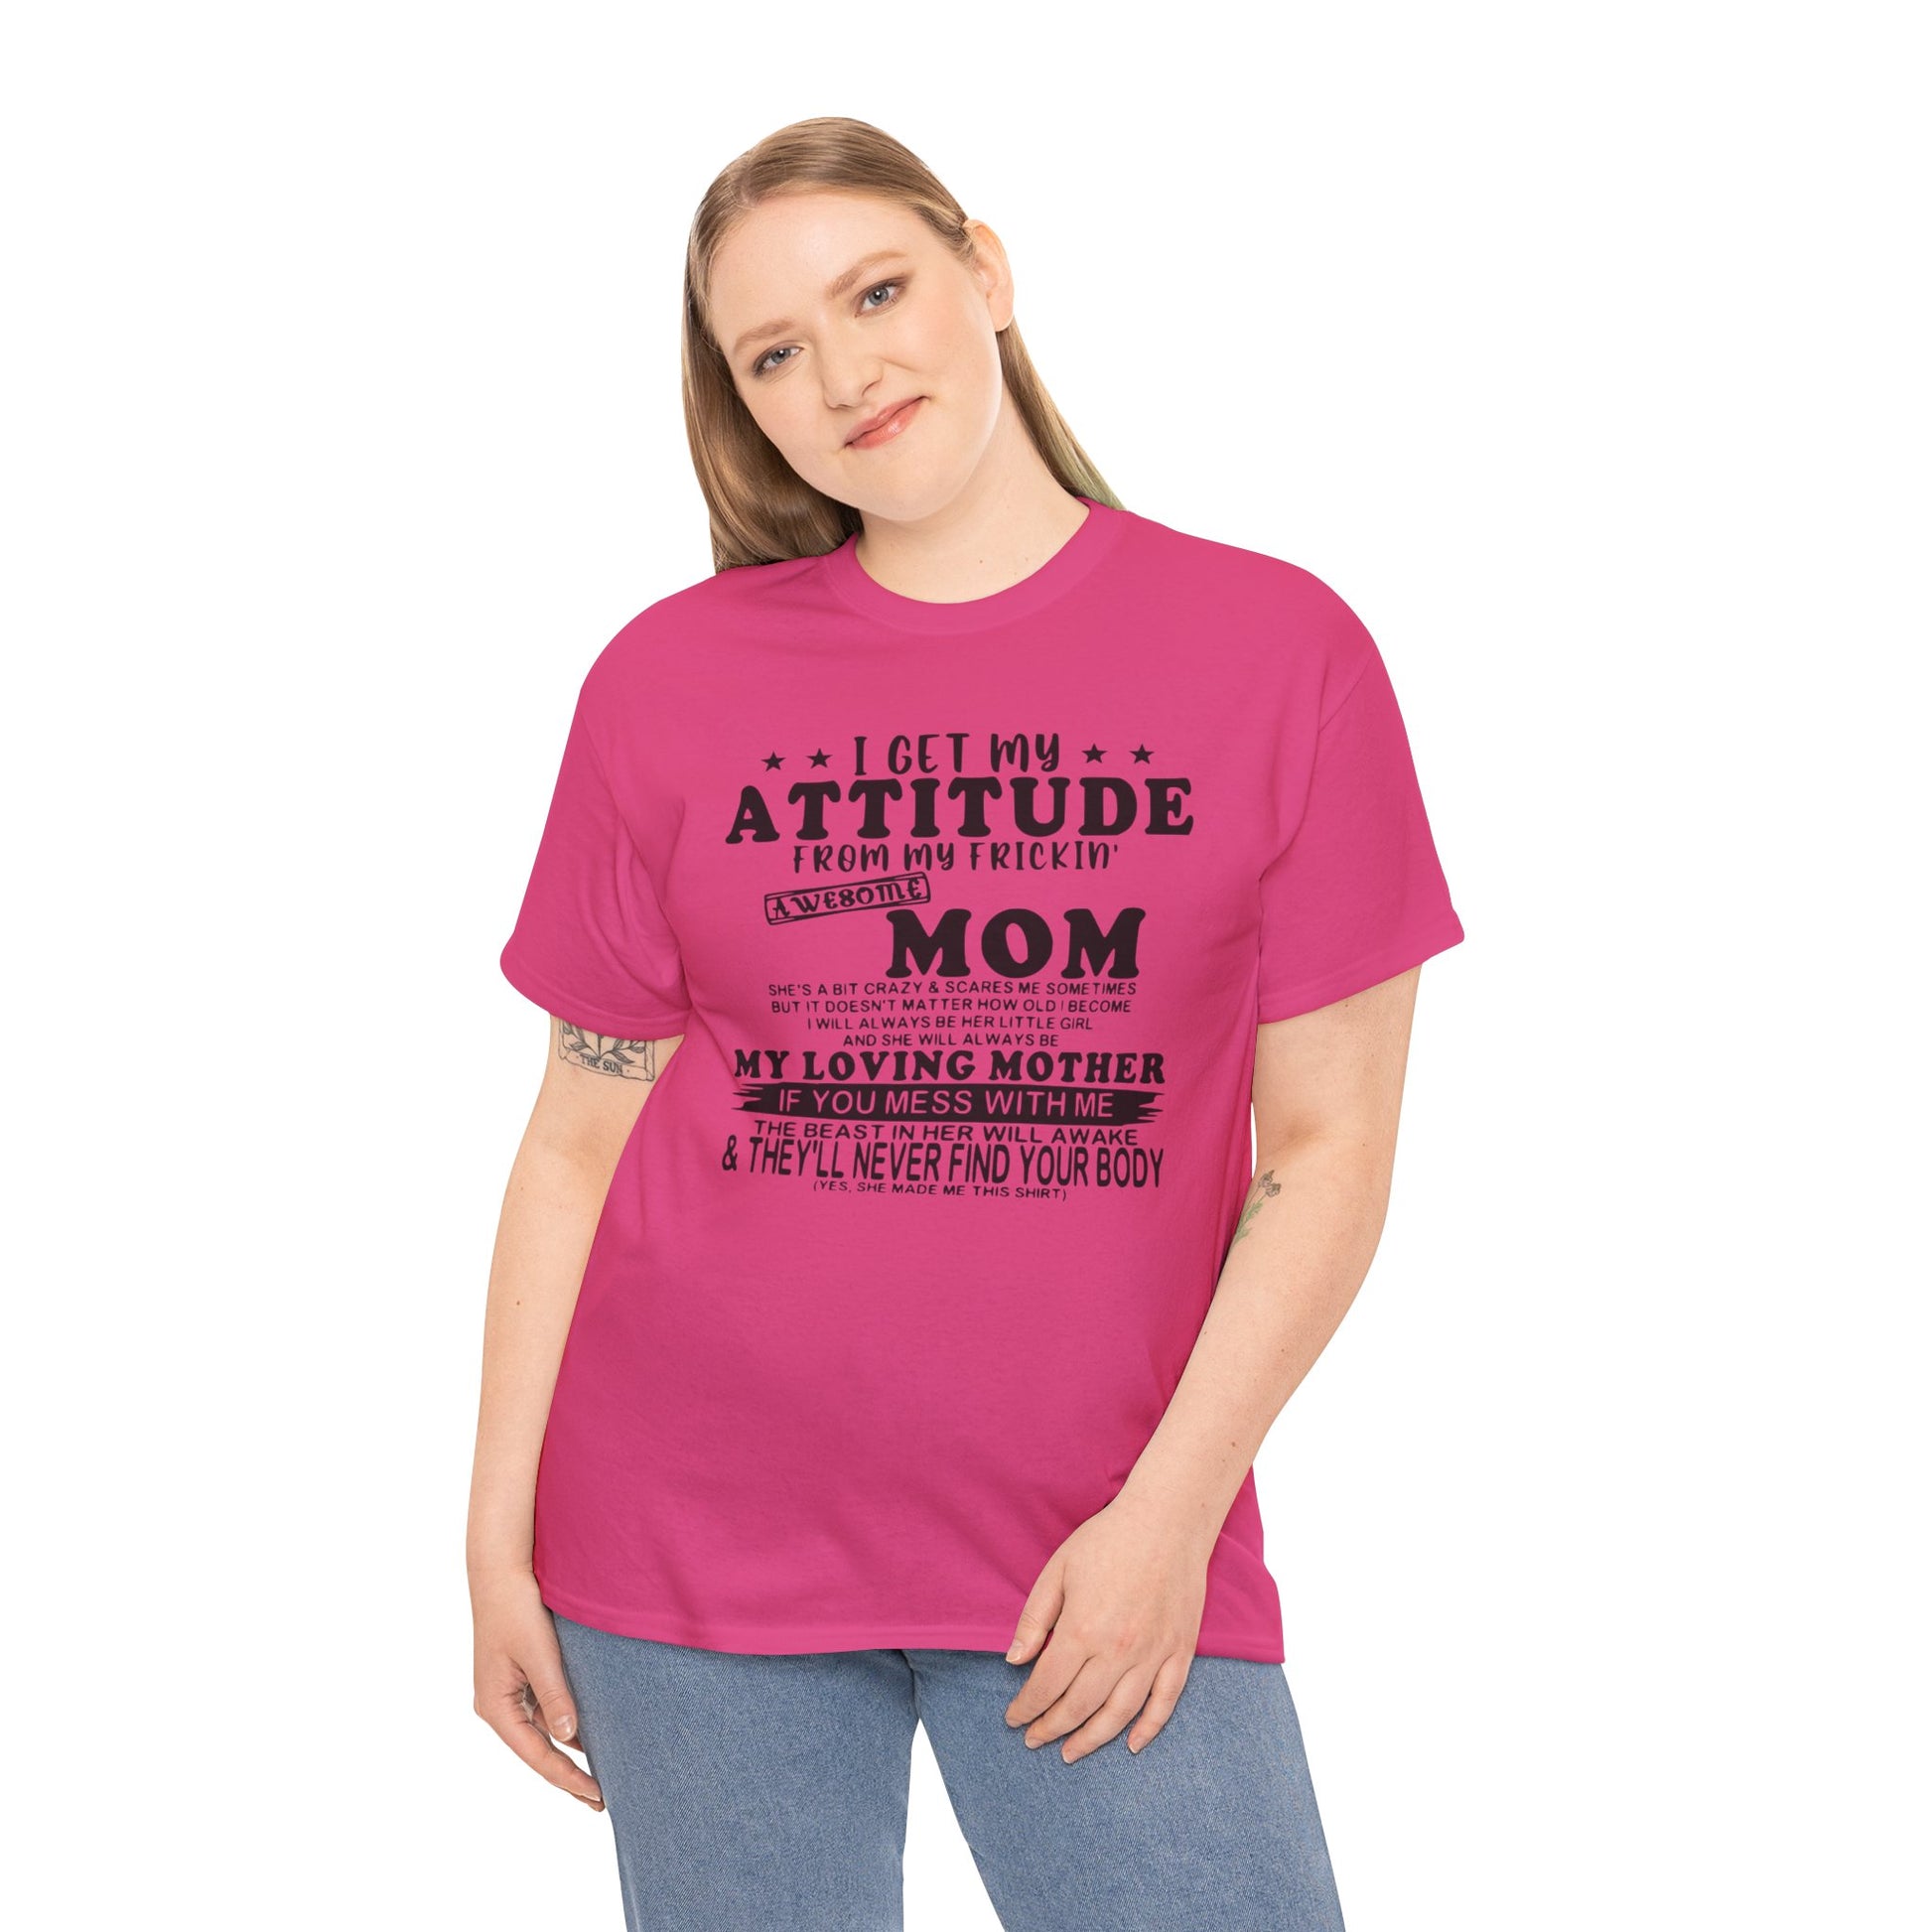 Premium quality cotton tee with "My Frickin Awesome Mom" design, perfect for casual wear.